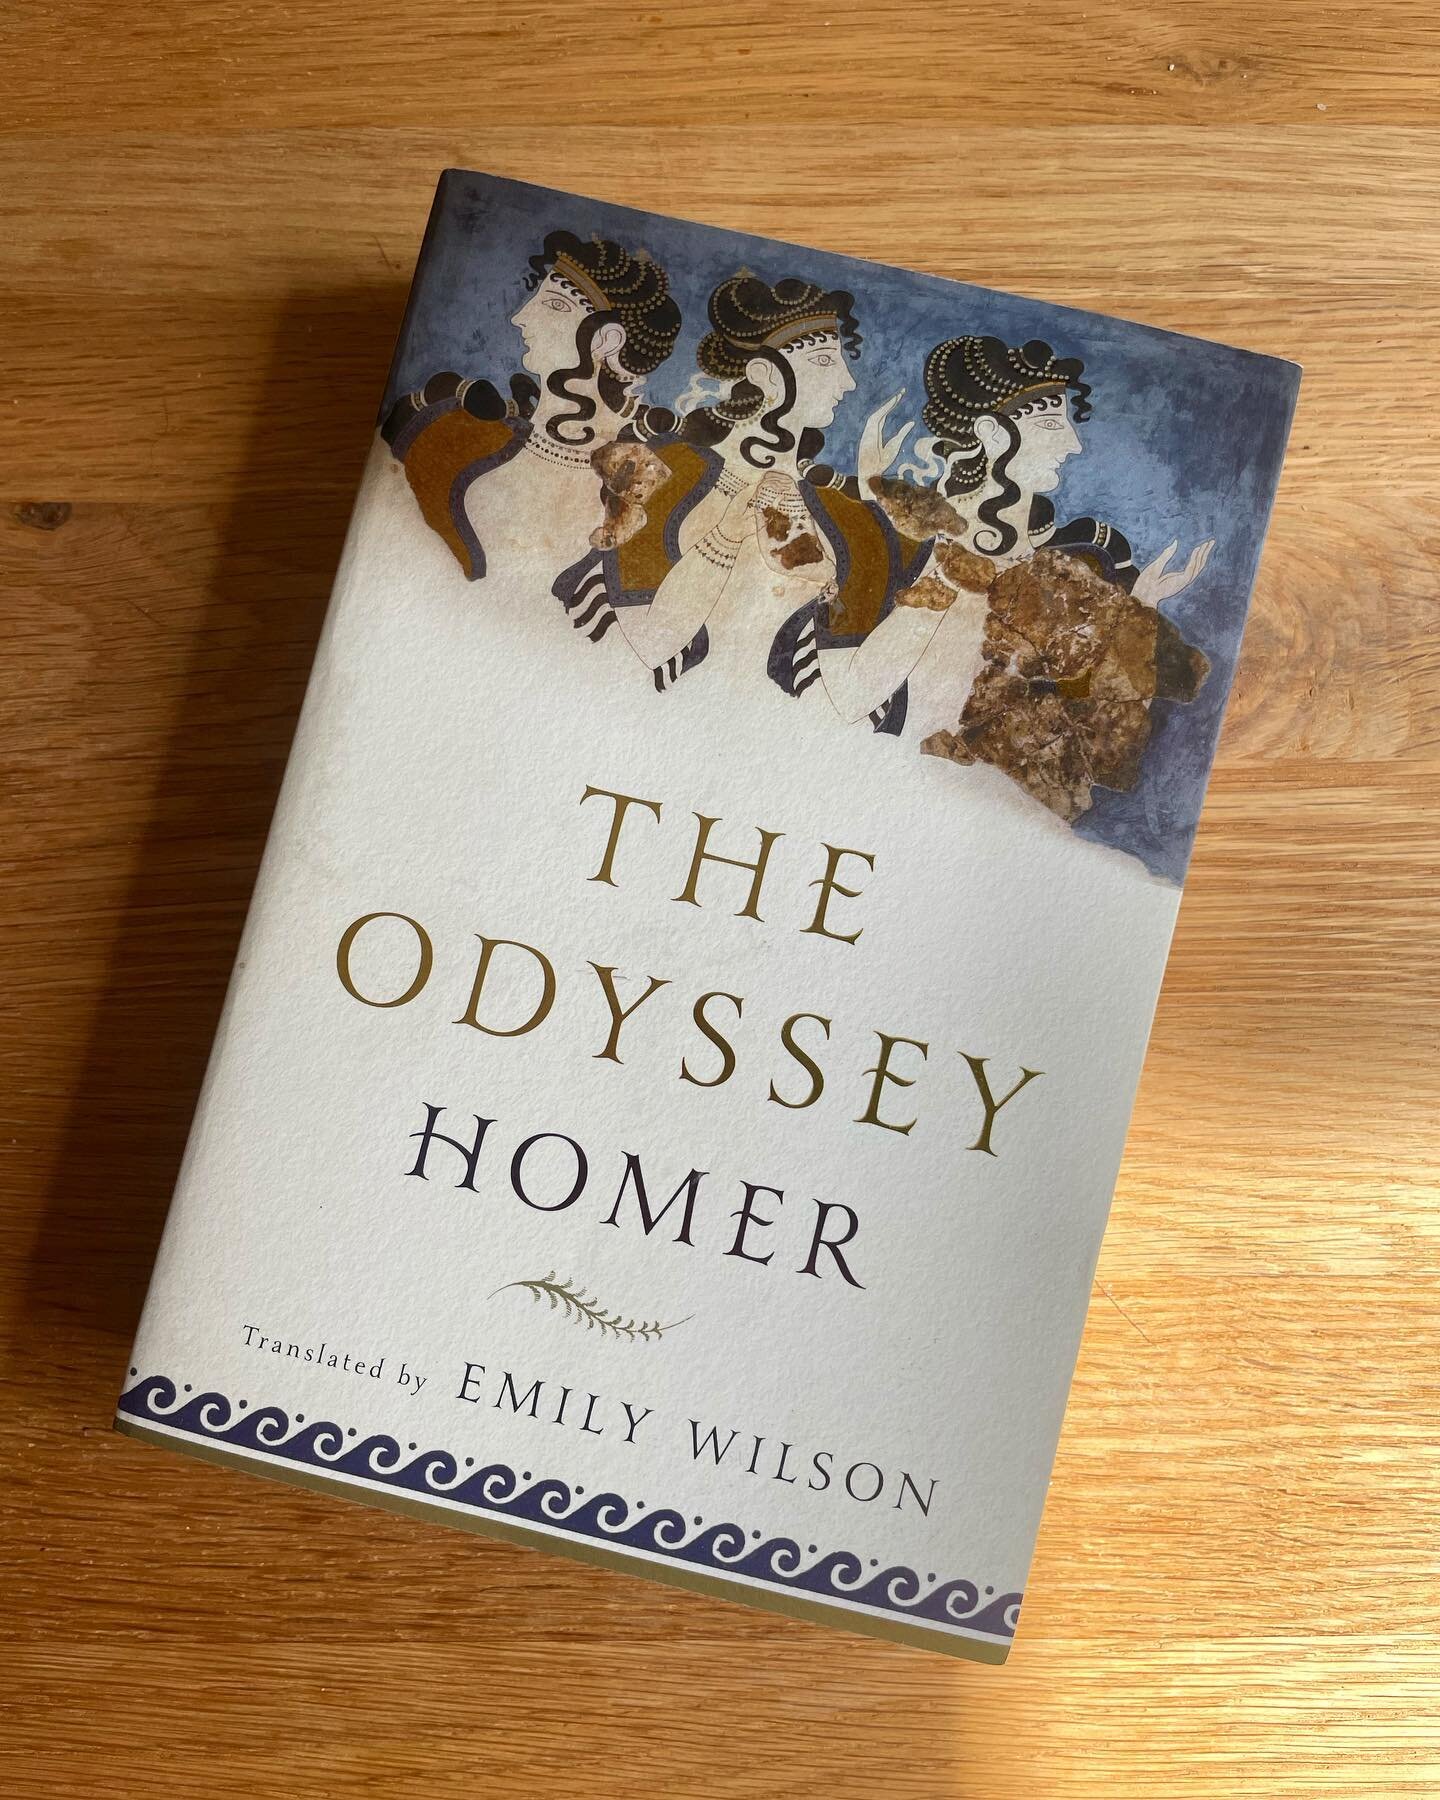 &ldquo;Tell me about a complicated man.&rdquo; 
&bull;
Anyone wanting to read The Odyssey, this is the translation I 100% recommend. Wilson&rsquo;s narrative is so crisp and clear, allowing the story to flow smoothly without any of the pretentious gr